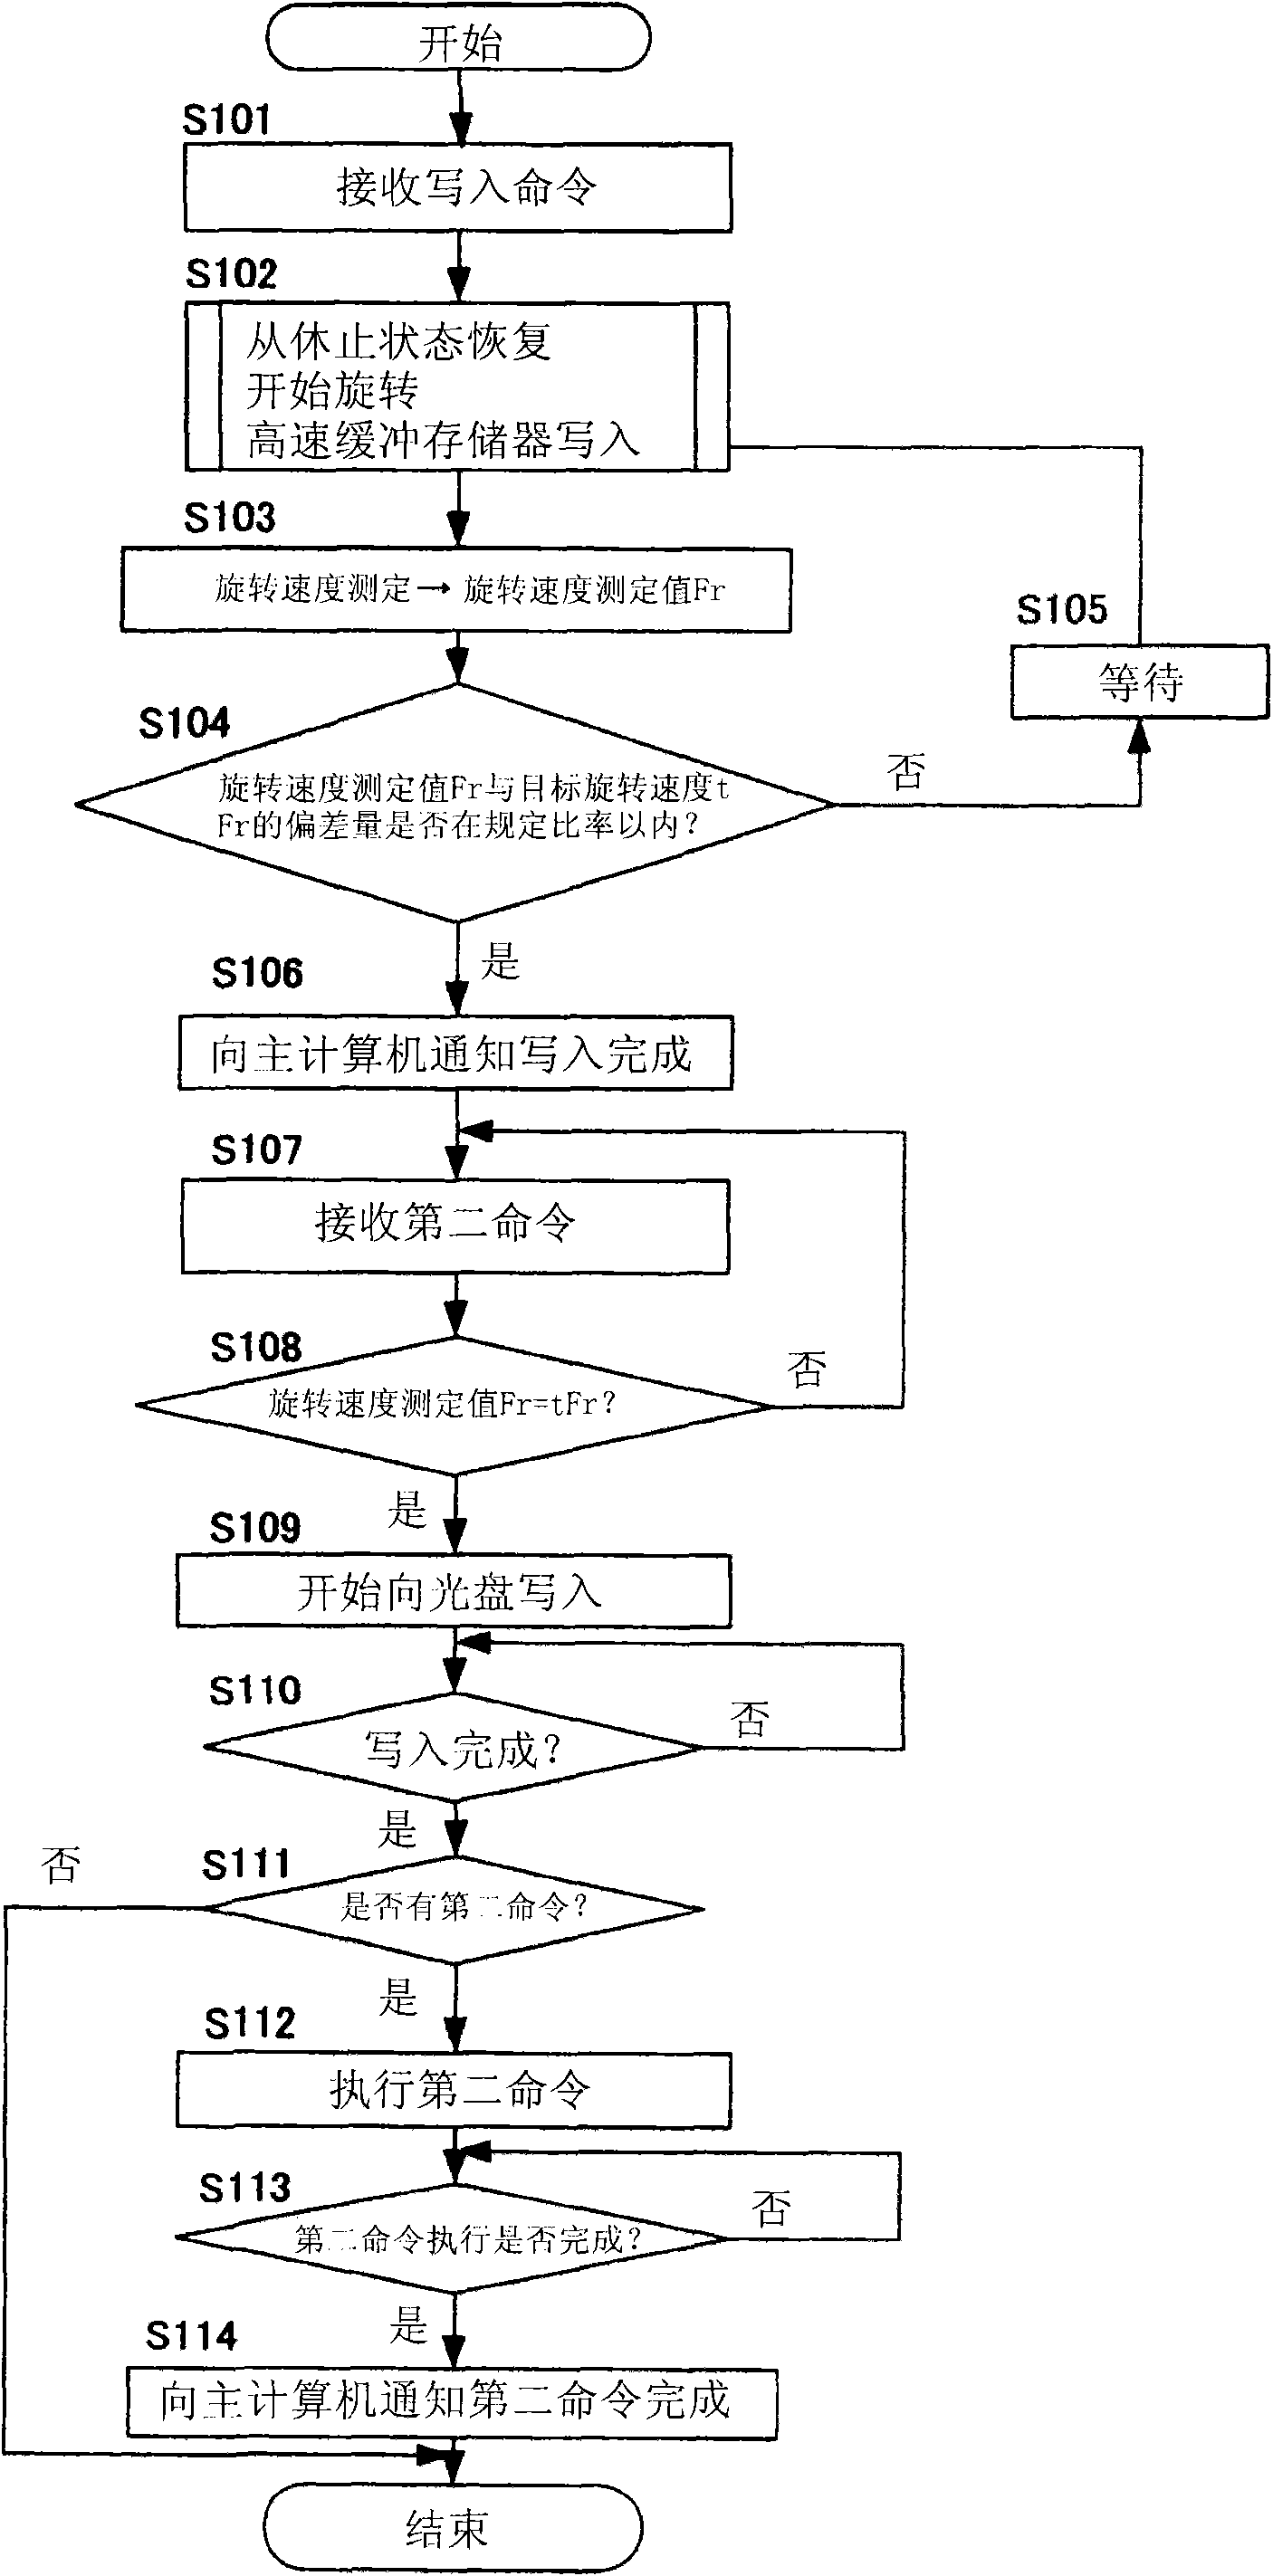 Optical disc drive and hibernation recovery method for an optical disc drive